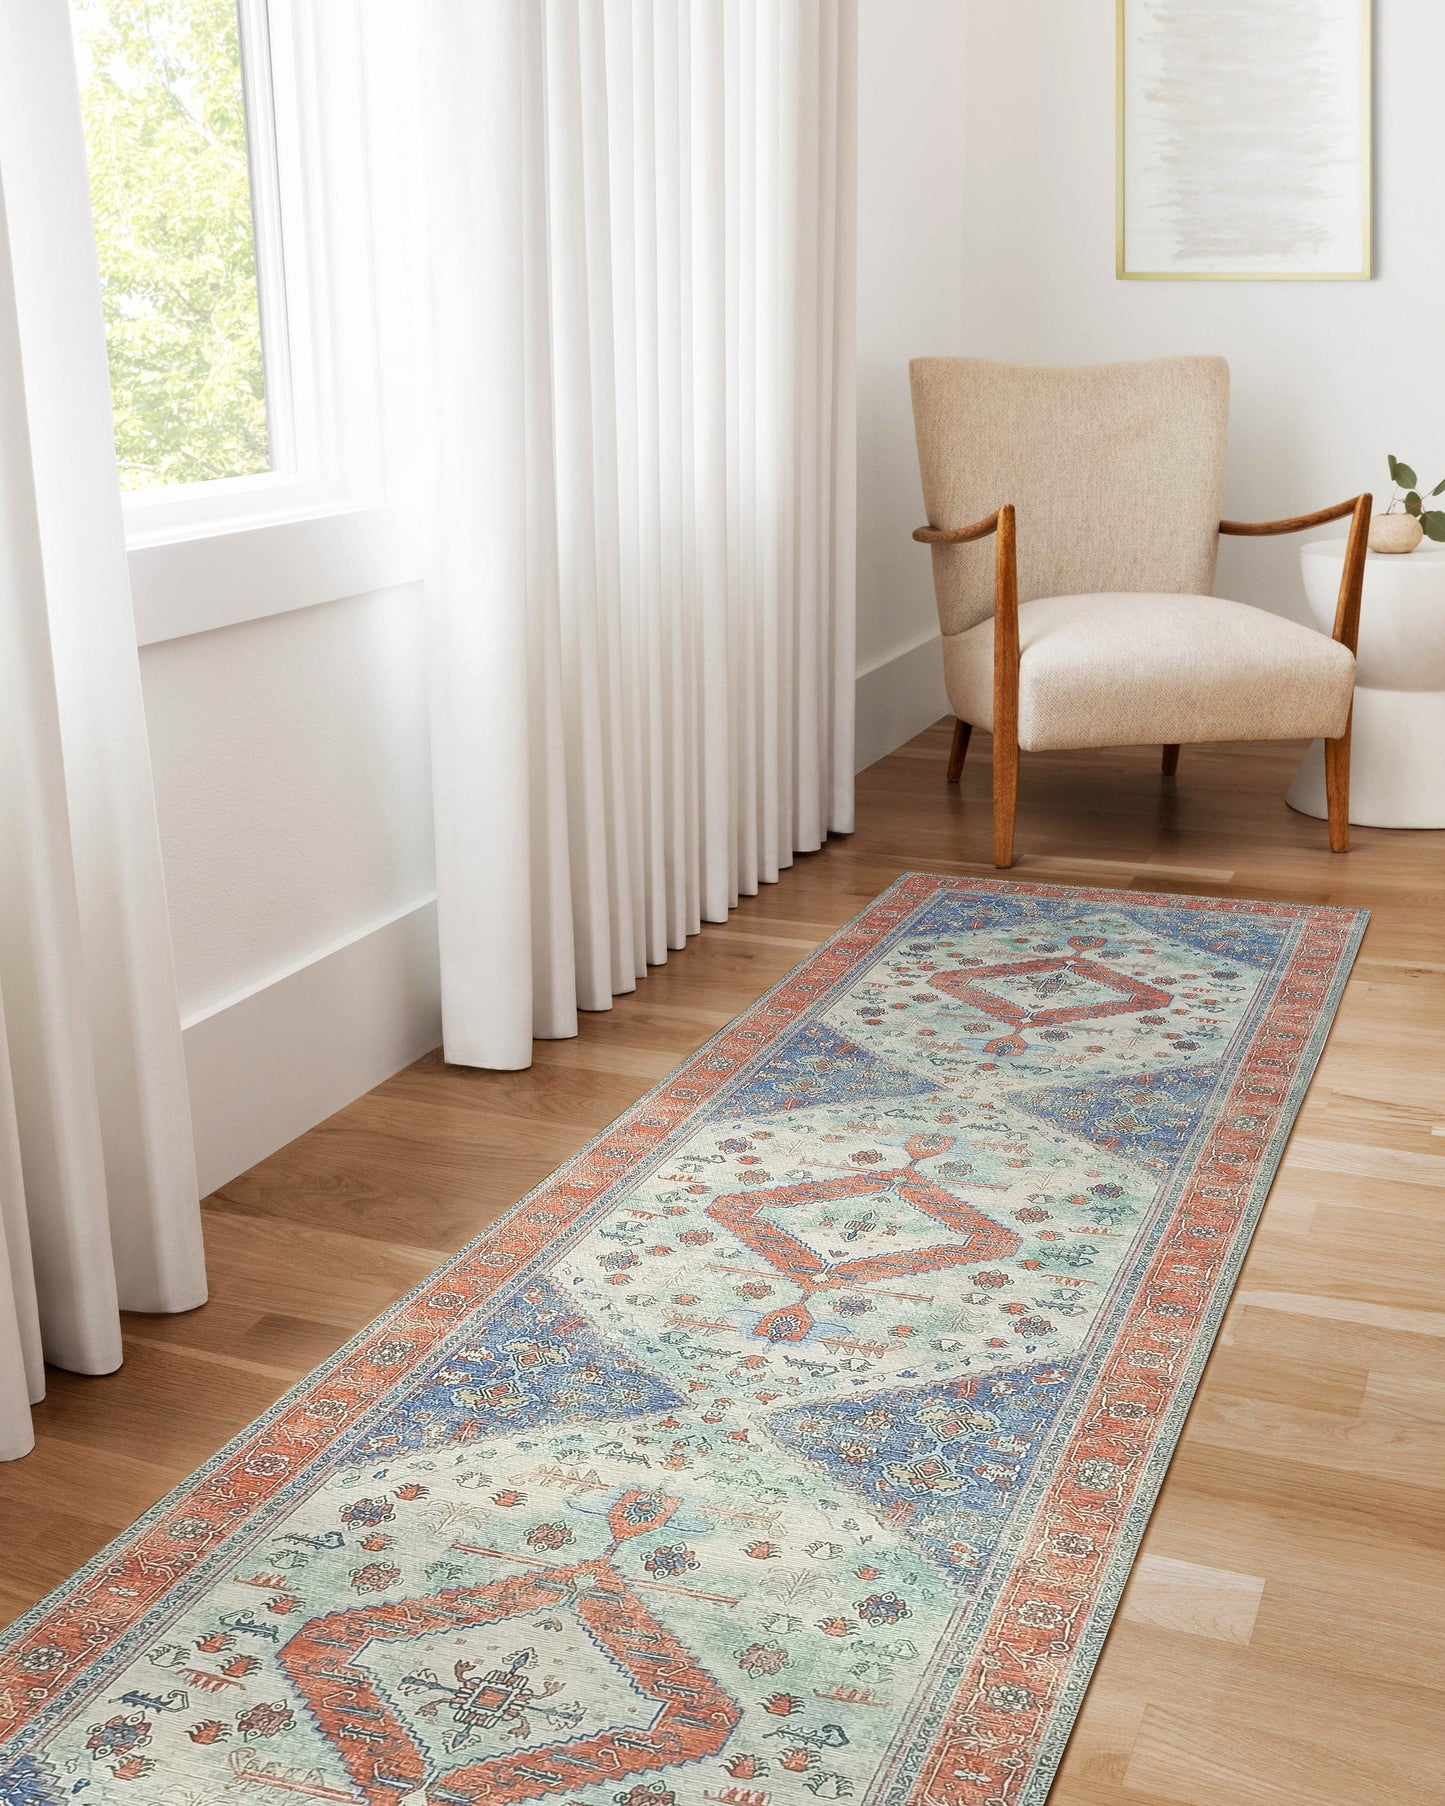 Serapi Antique Persian Rug, Shades of Brunt Orange with a touch of Blue Modern Oriental Vintage Inspired Area Rugs Living room Bedroom Hall